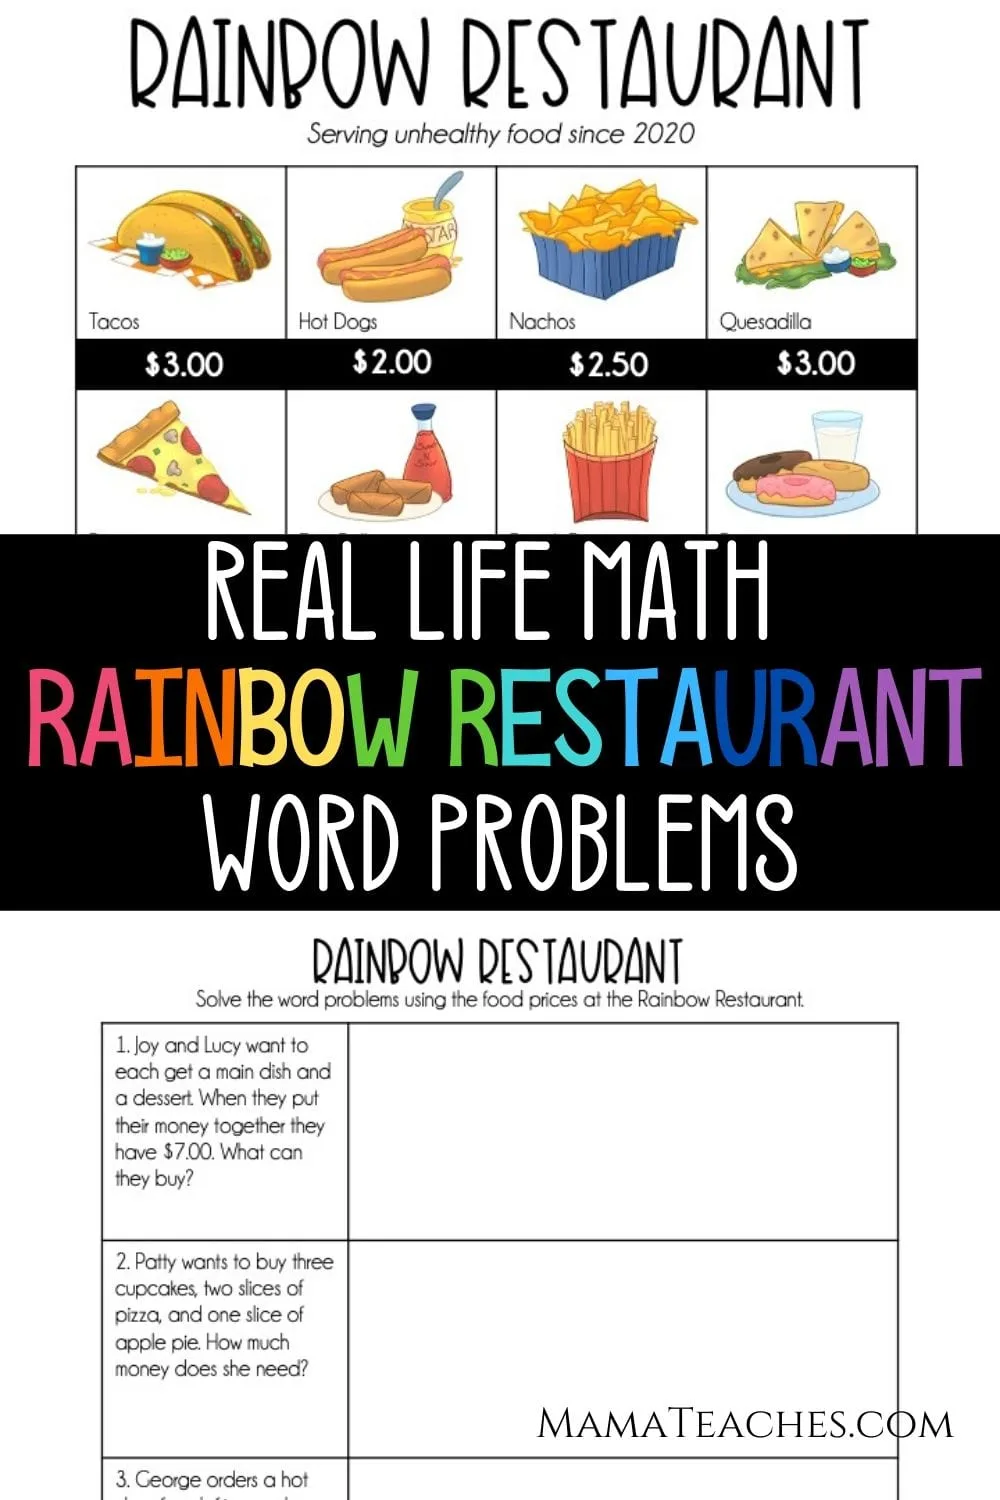 Rainbow Restaurant - Real Life Math Word Problems for Upper Elementary - MamaTeaches.com